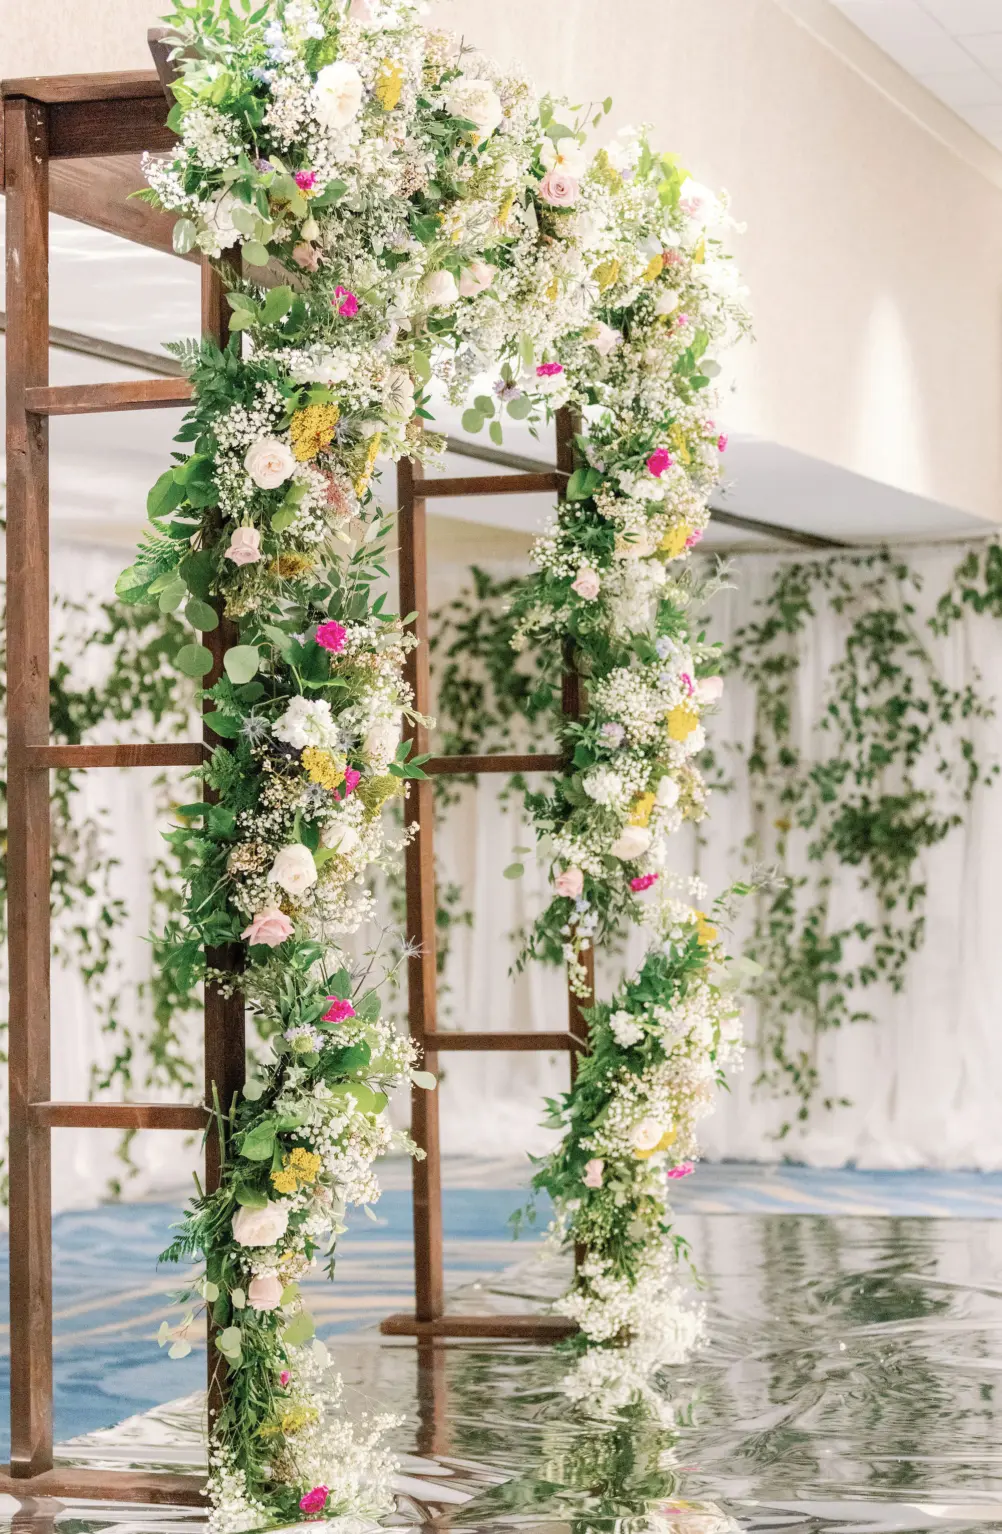 Pink, Yellow, and White Spring Flowers Arch Inspiration | Colorful Indian Fusion Wedding Ceremony | Tampa Bay Florist Lemon Drops Weddings & Events